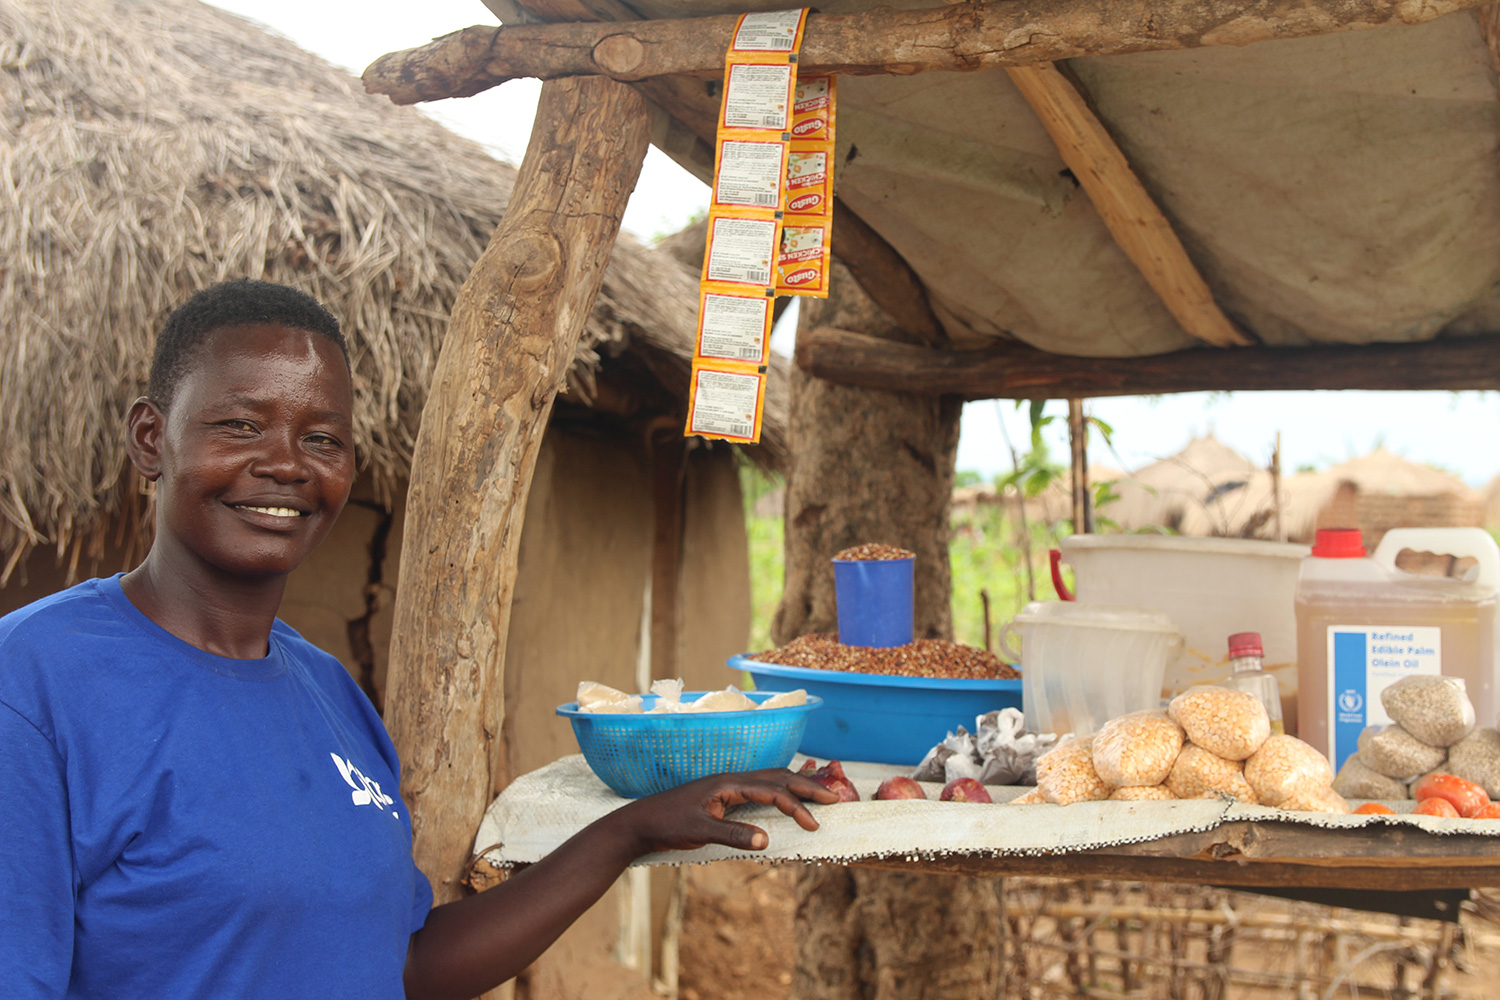 Annet poses with her shop stall